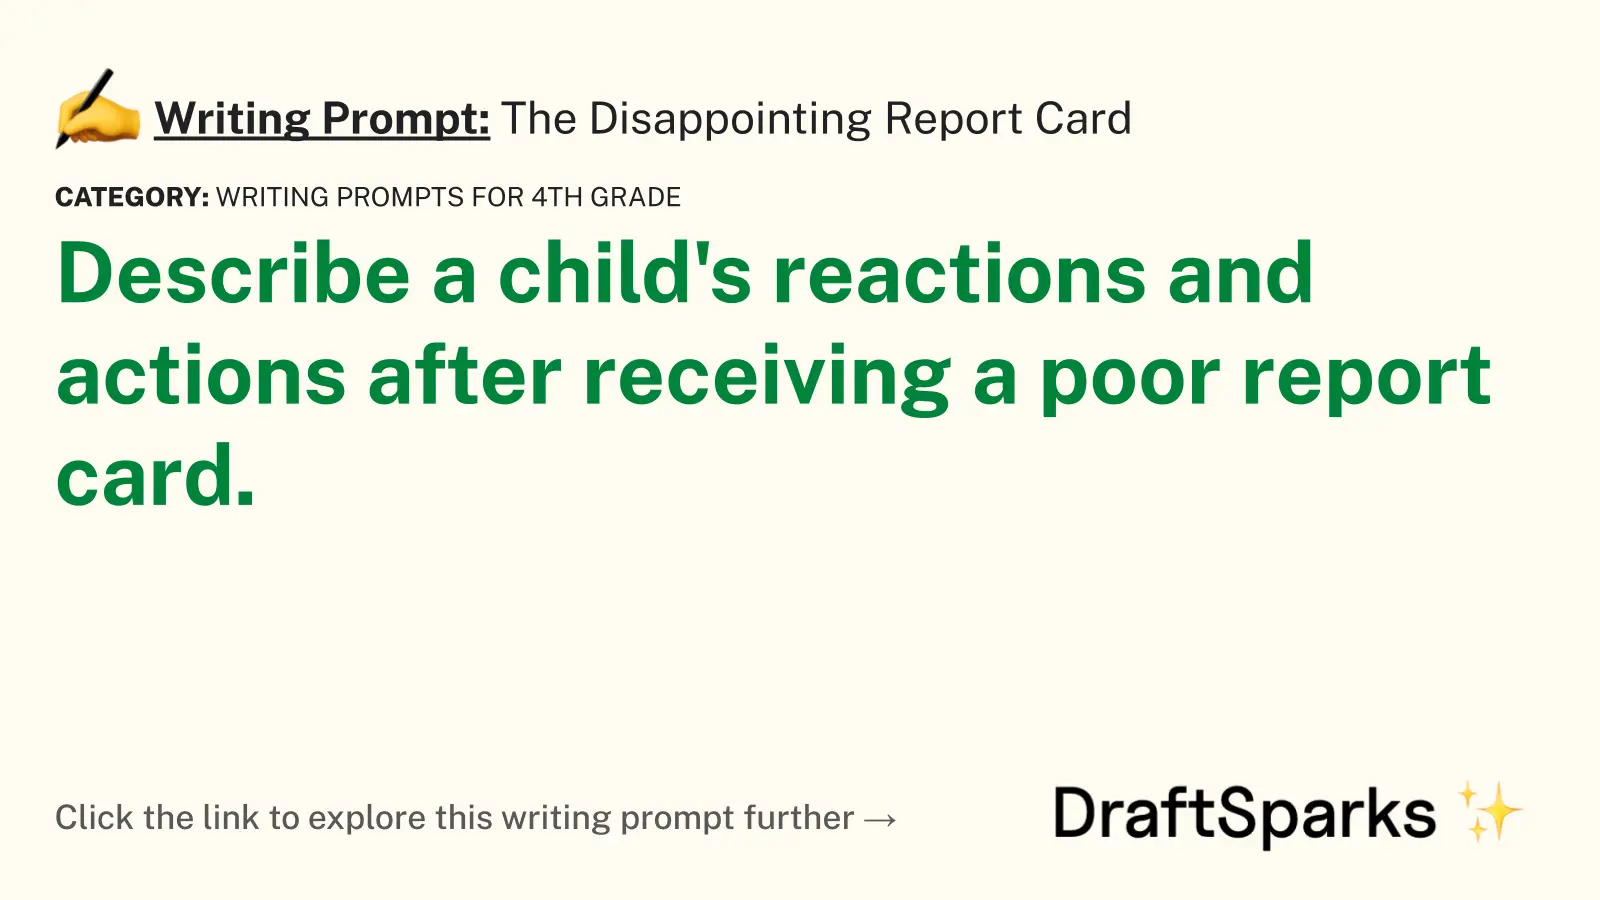 The Disappointing Report Card